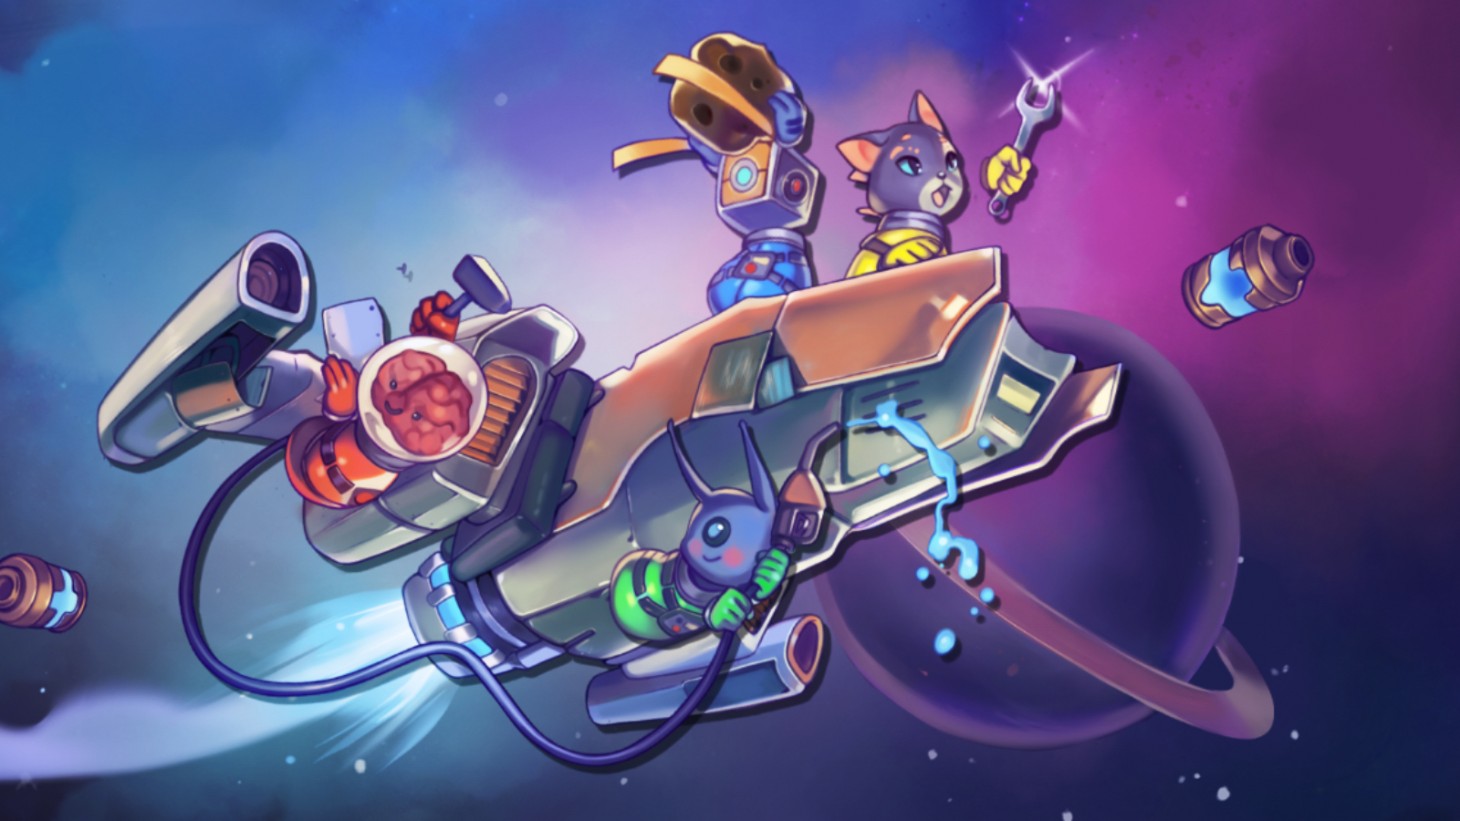 Fueled Up Is A Chaotic Four-Player Couch Co-Op Game Developed By Fireline Games